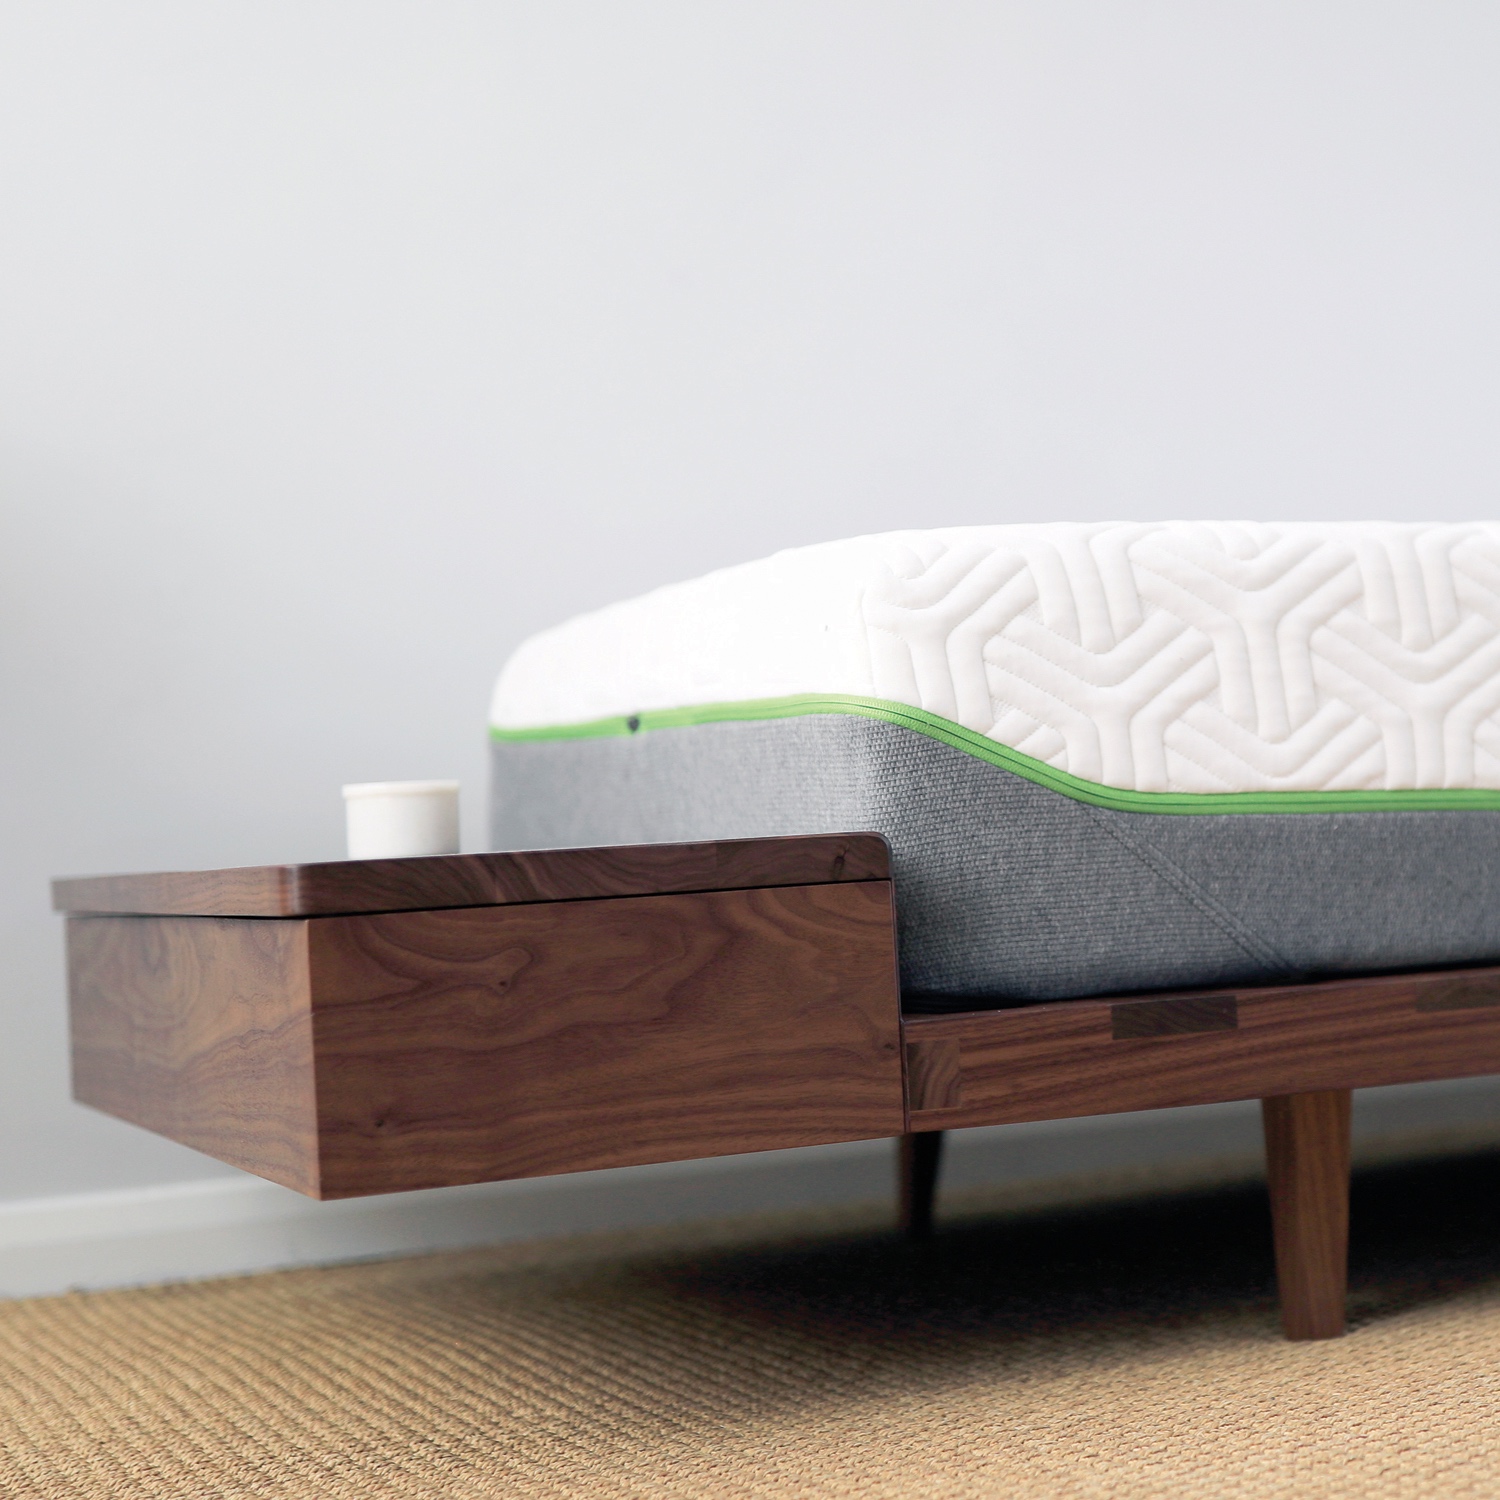 Tailor made Day Bed constructed in solid walnut with large feature dovetail joints.